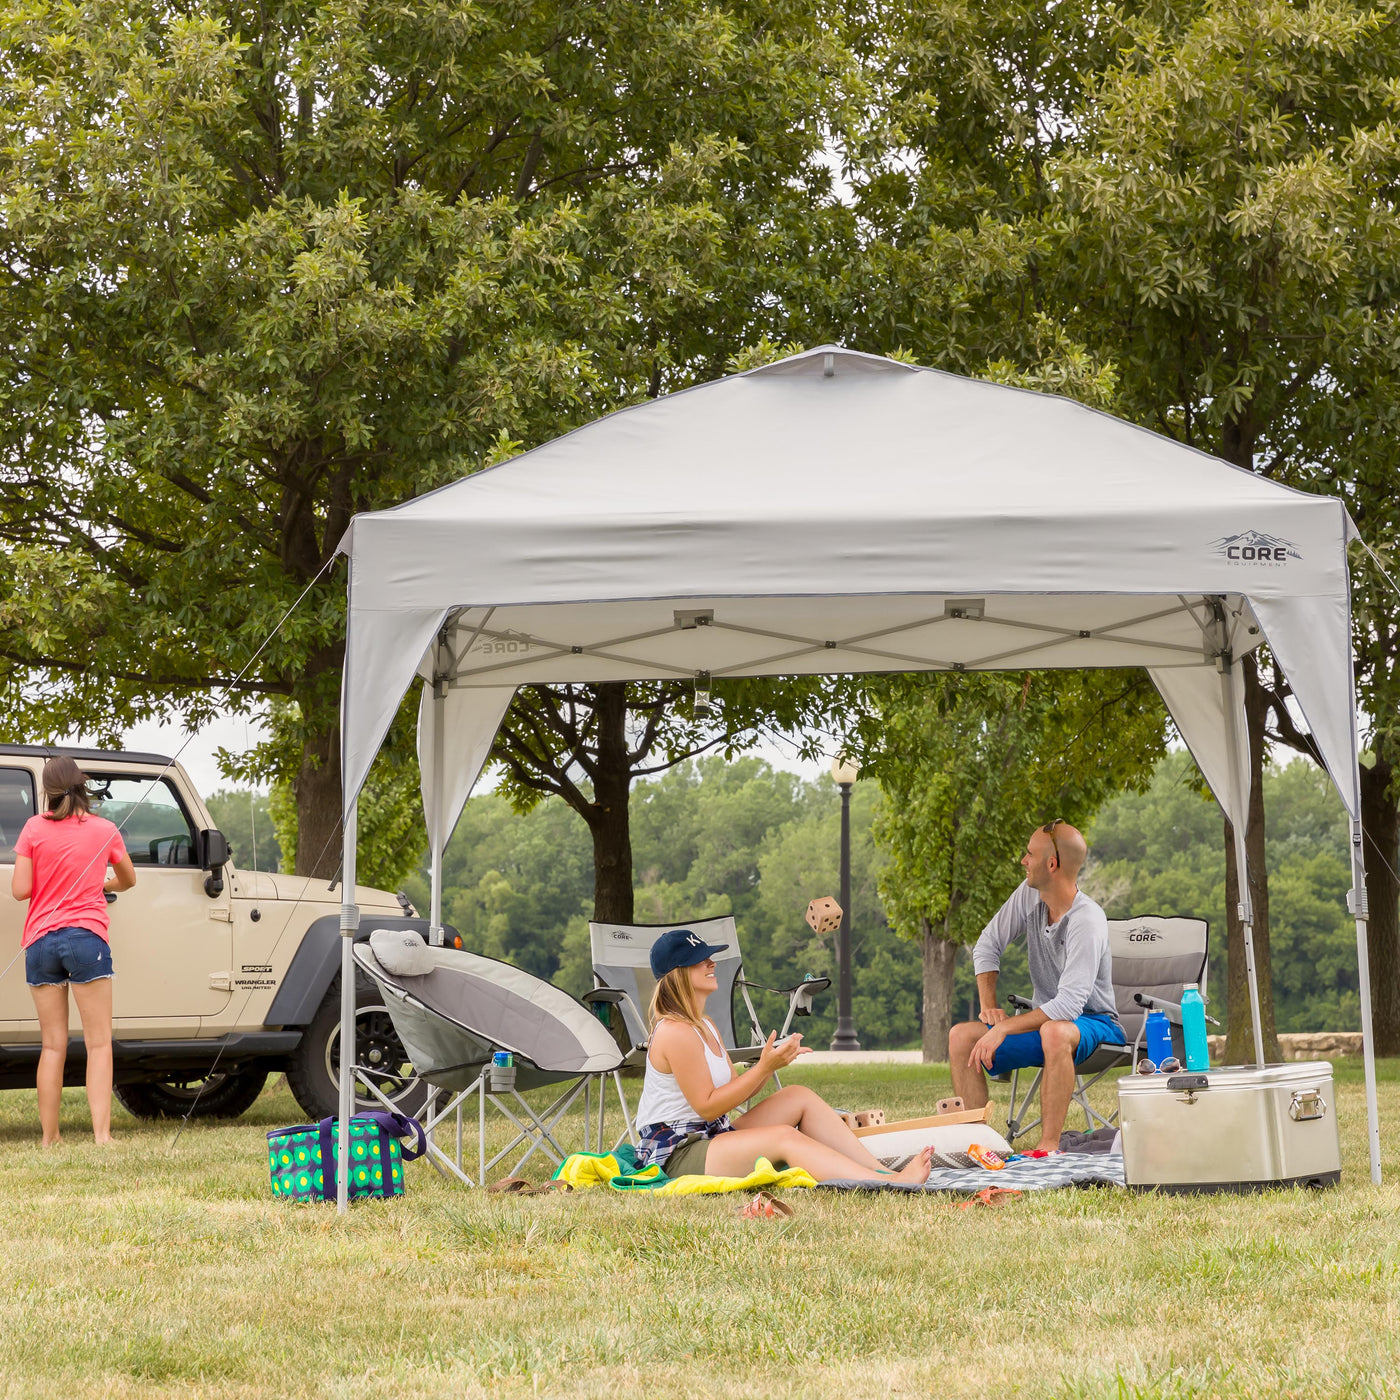 Core Equipment 10x10 Instant Canopy lifestyle image of friends in a park